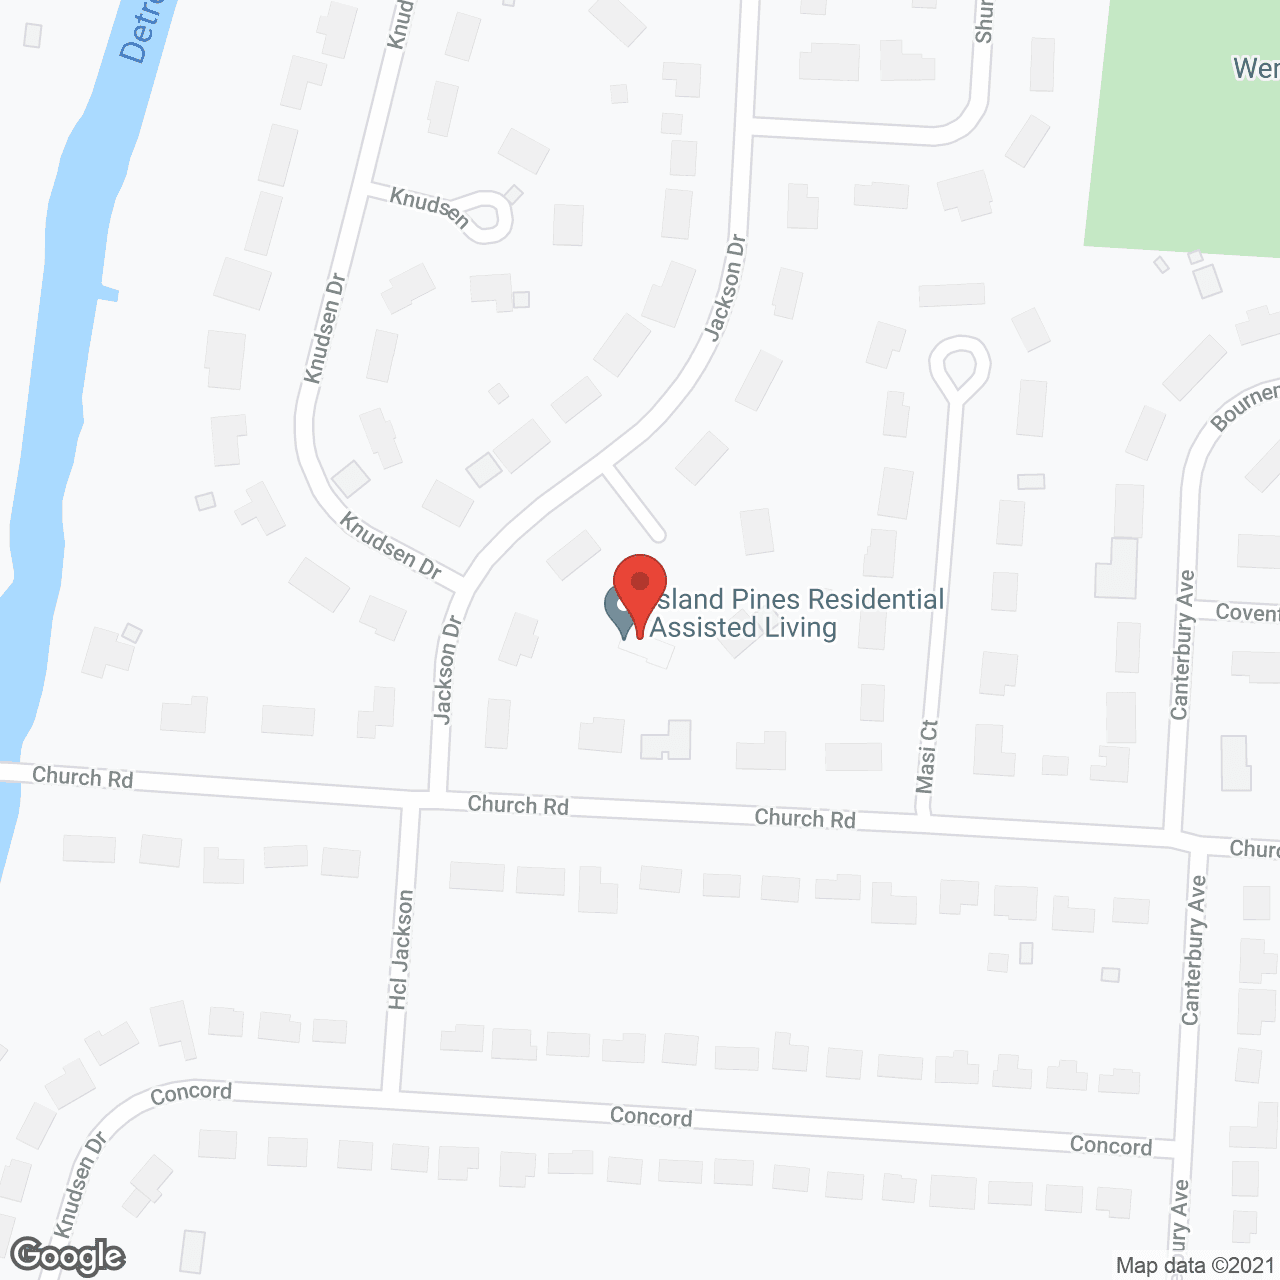 Island Pines Residential Assisted Living, LLC in google map